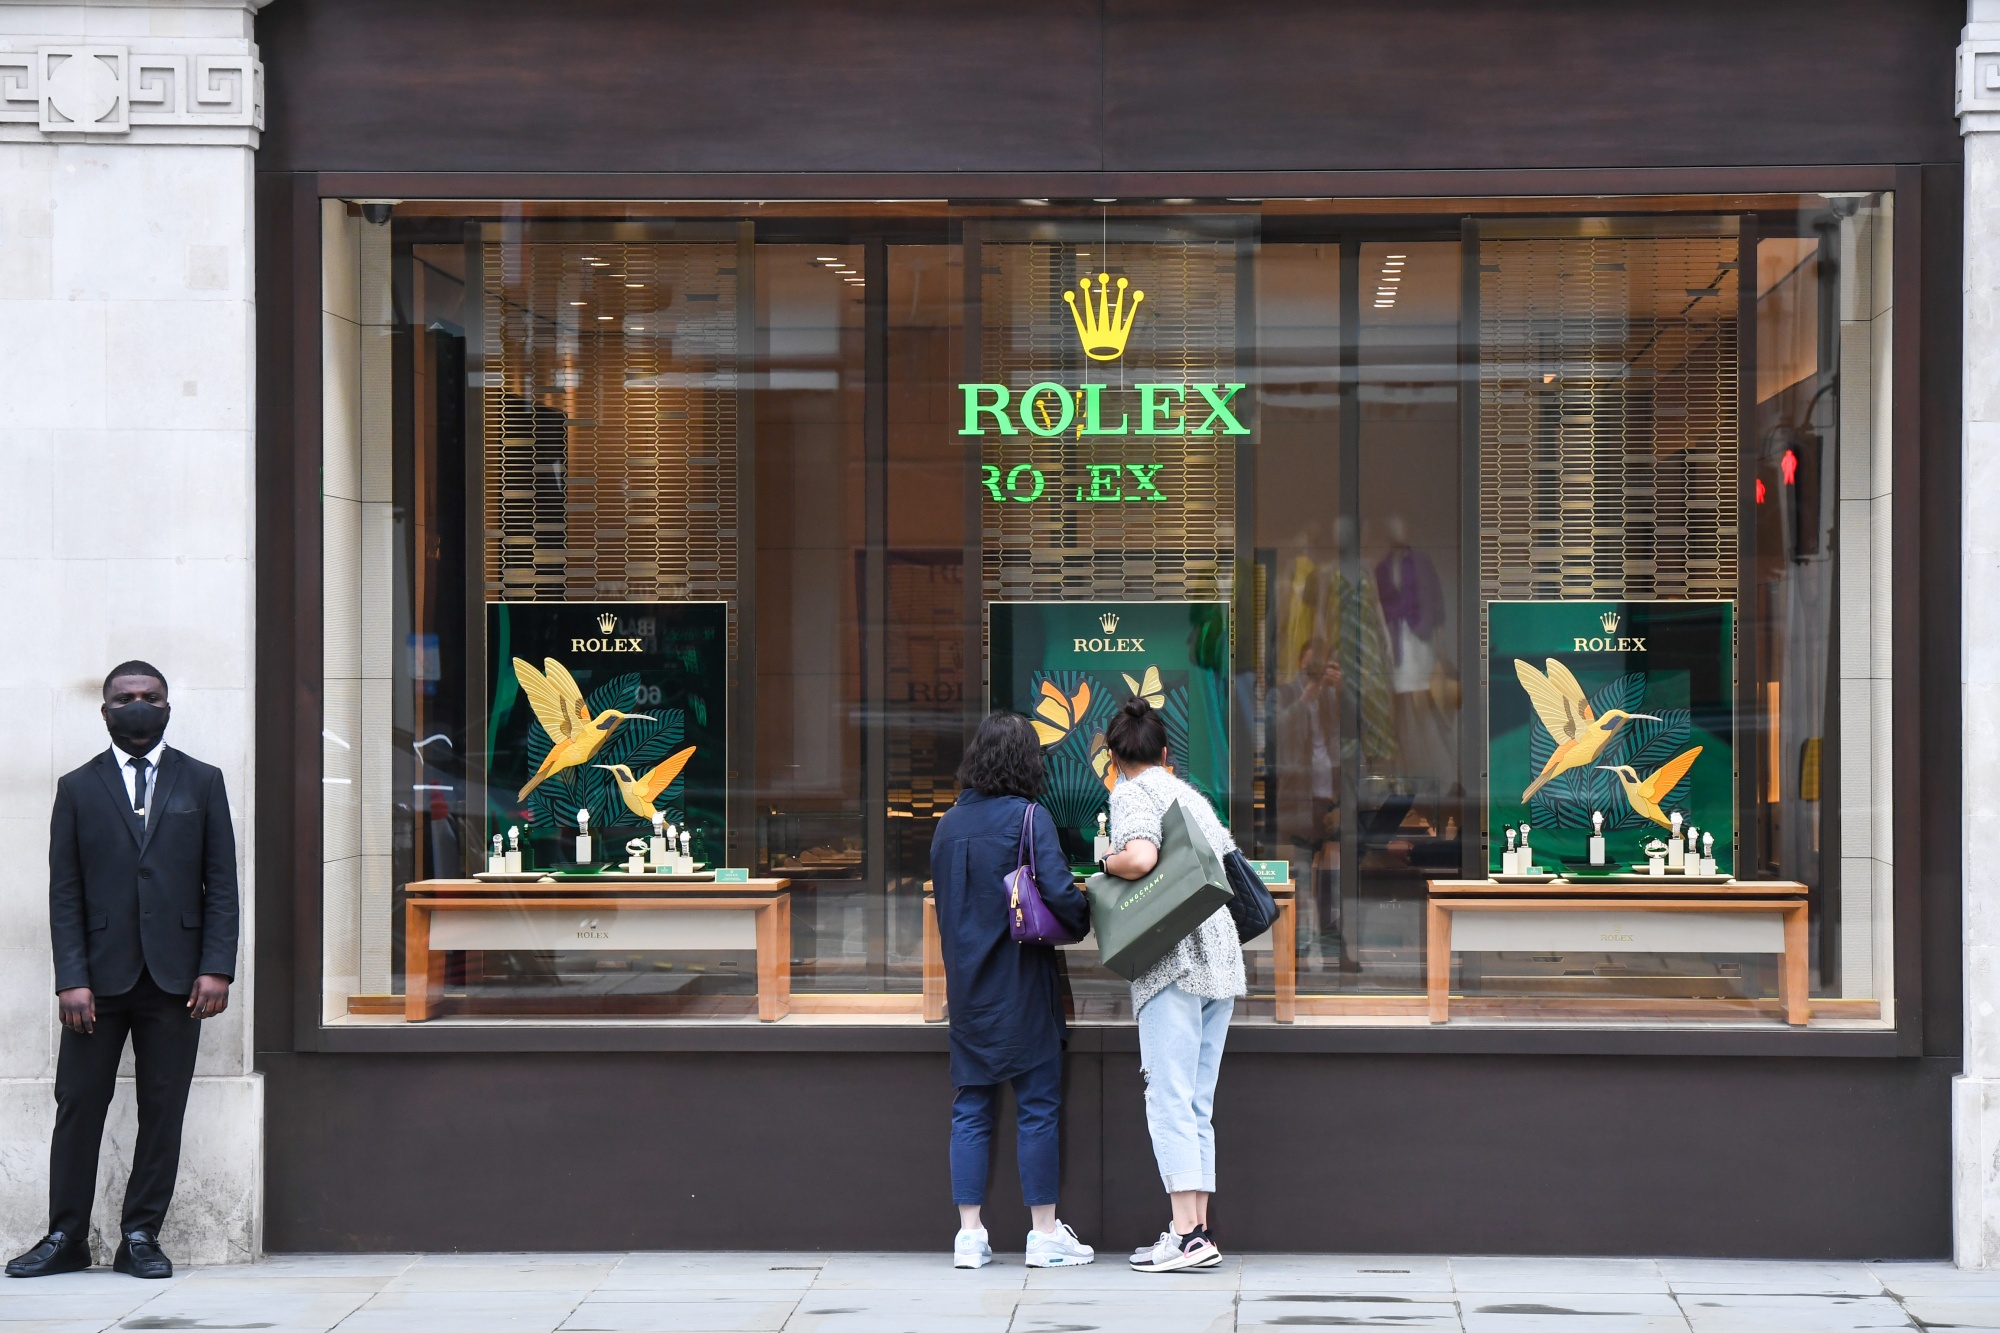 watches-of-switzerland-rolex-store-in-london-to-move-to-new-space-8